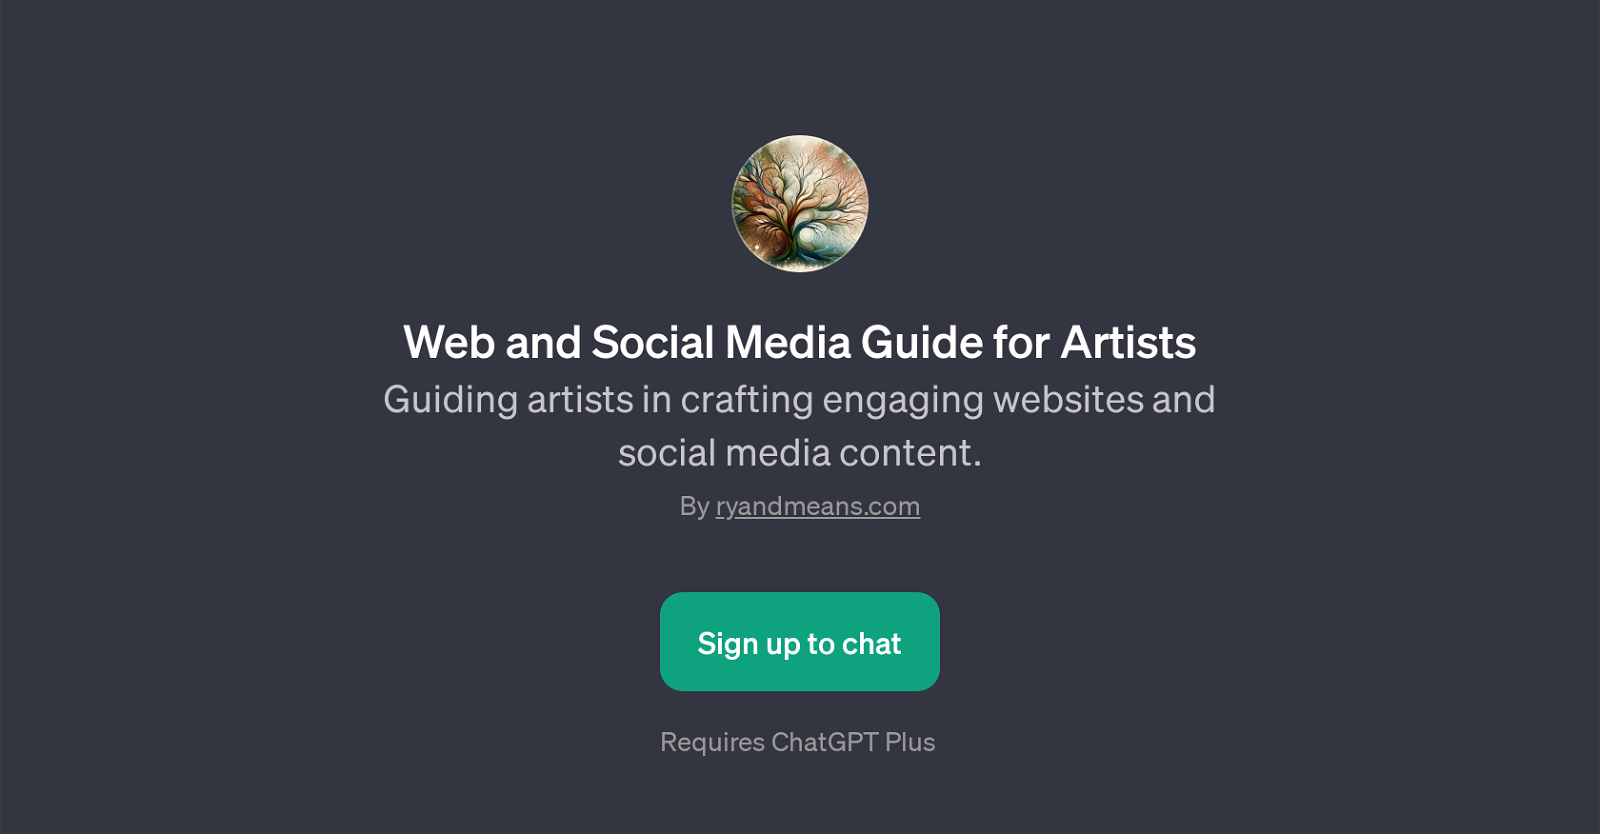 Web and Social Media Guide for Artists website